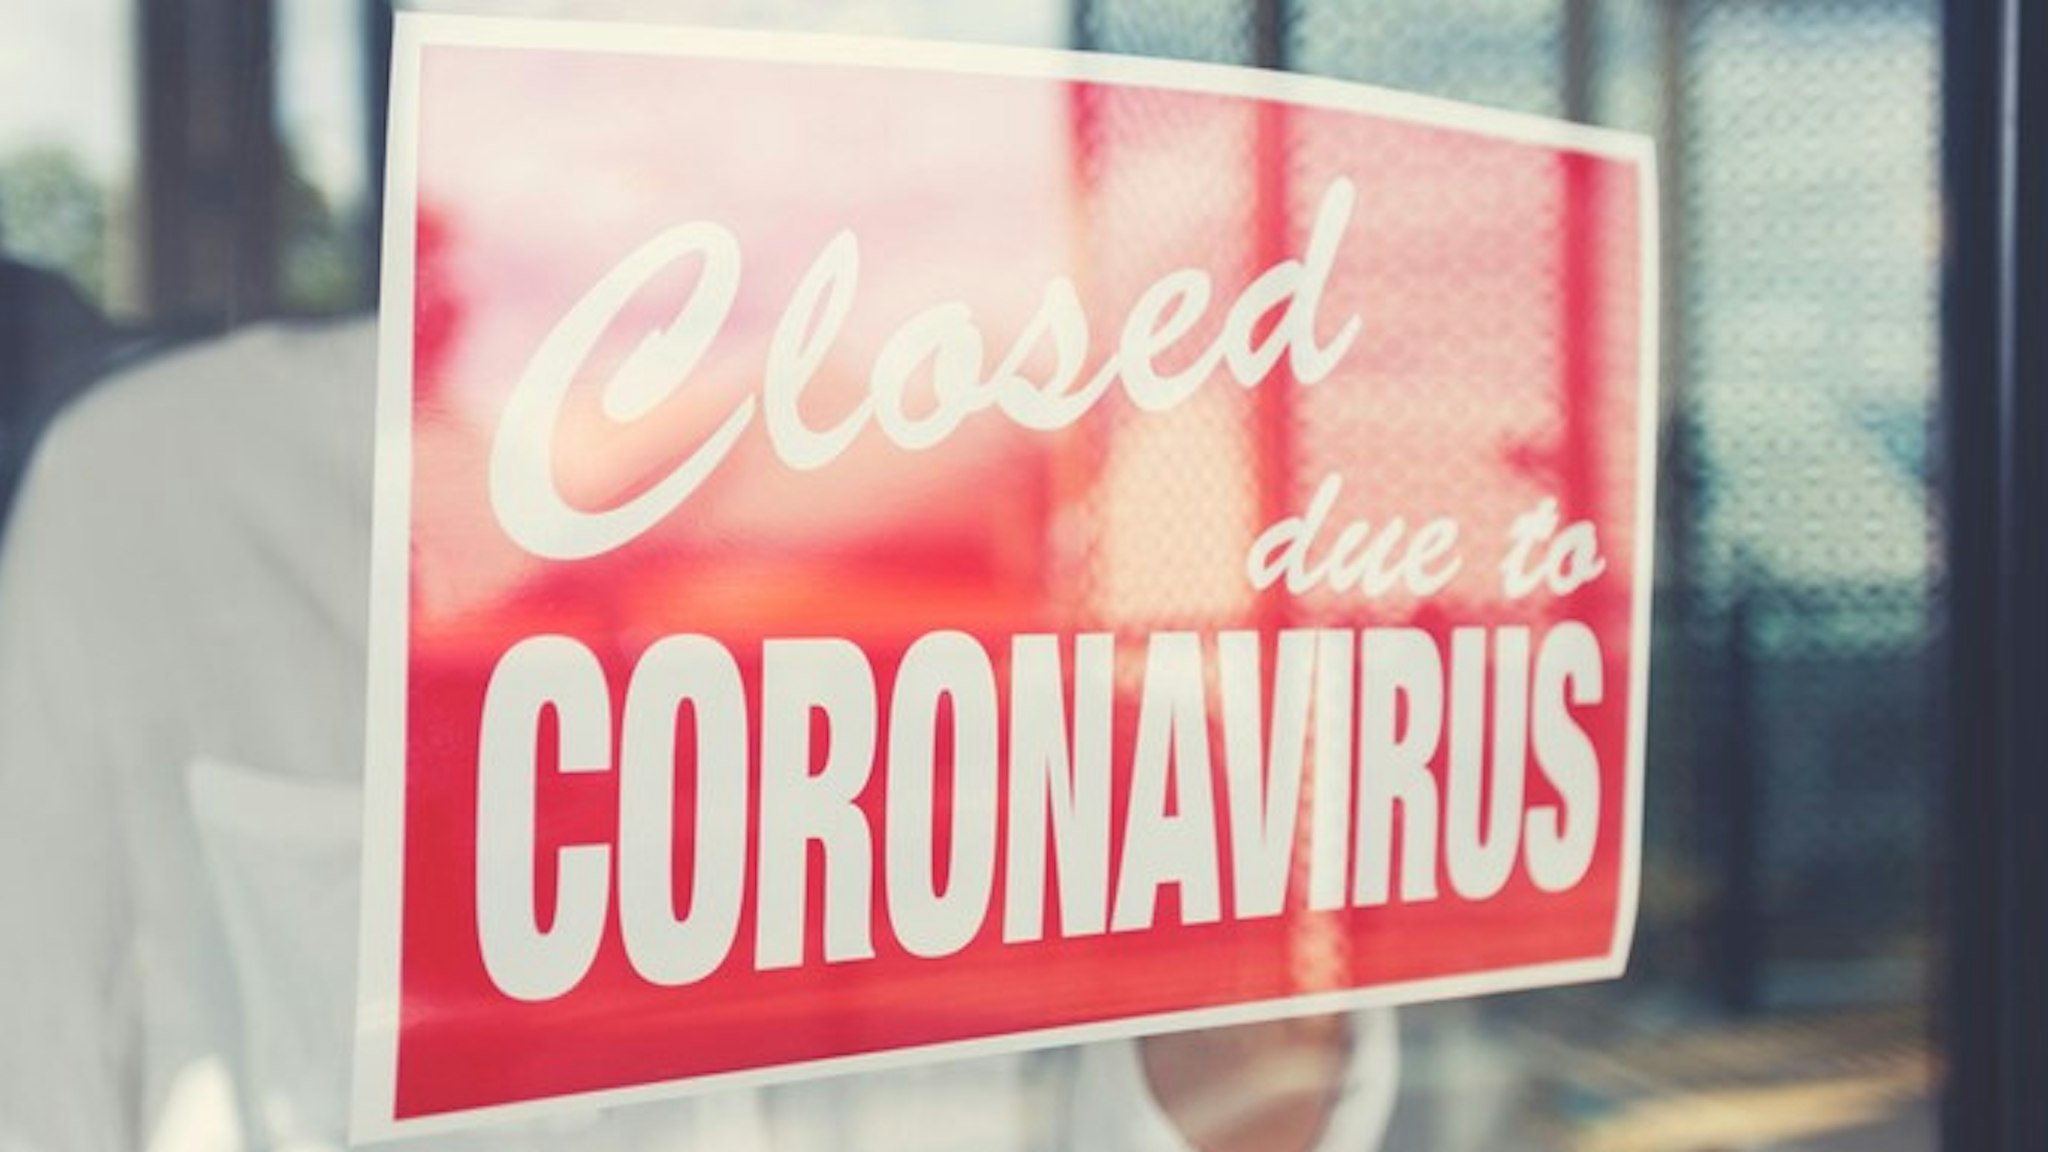 Store owner putting up a closed sign in the window. Sign says: closed due to coronavirus